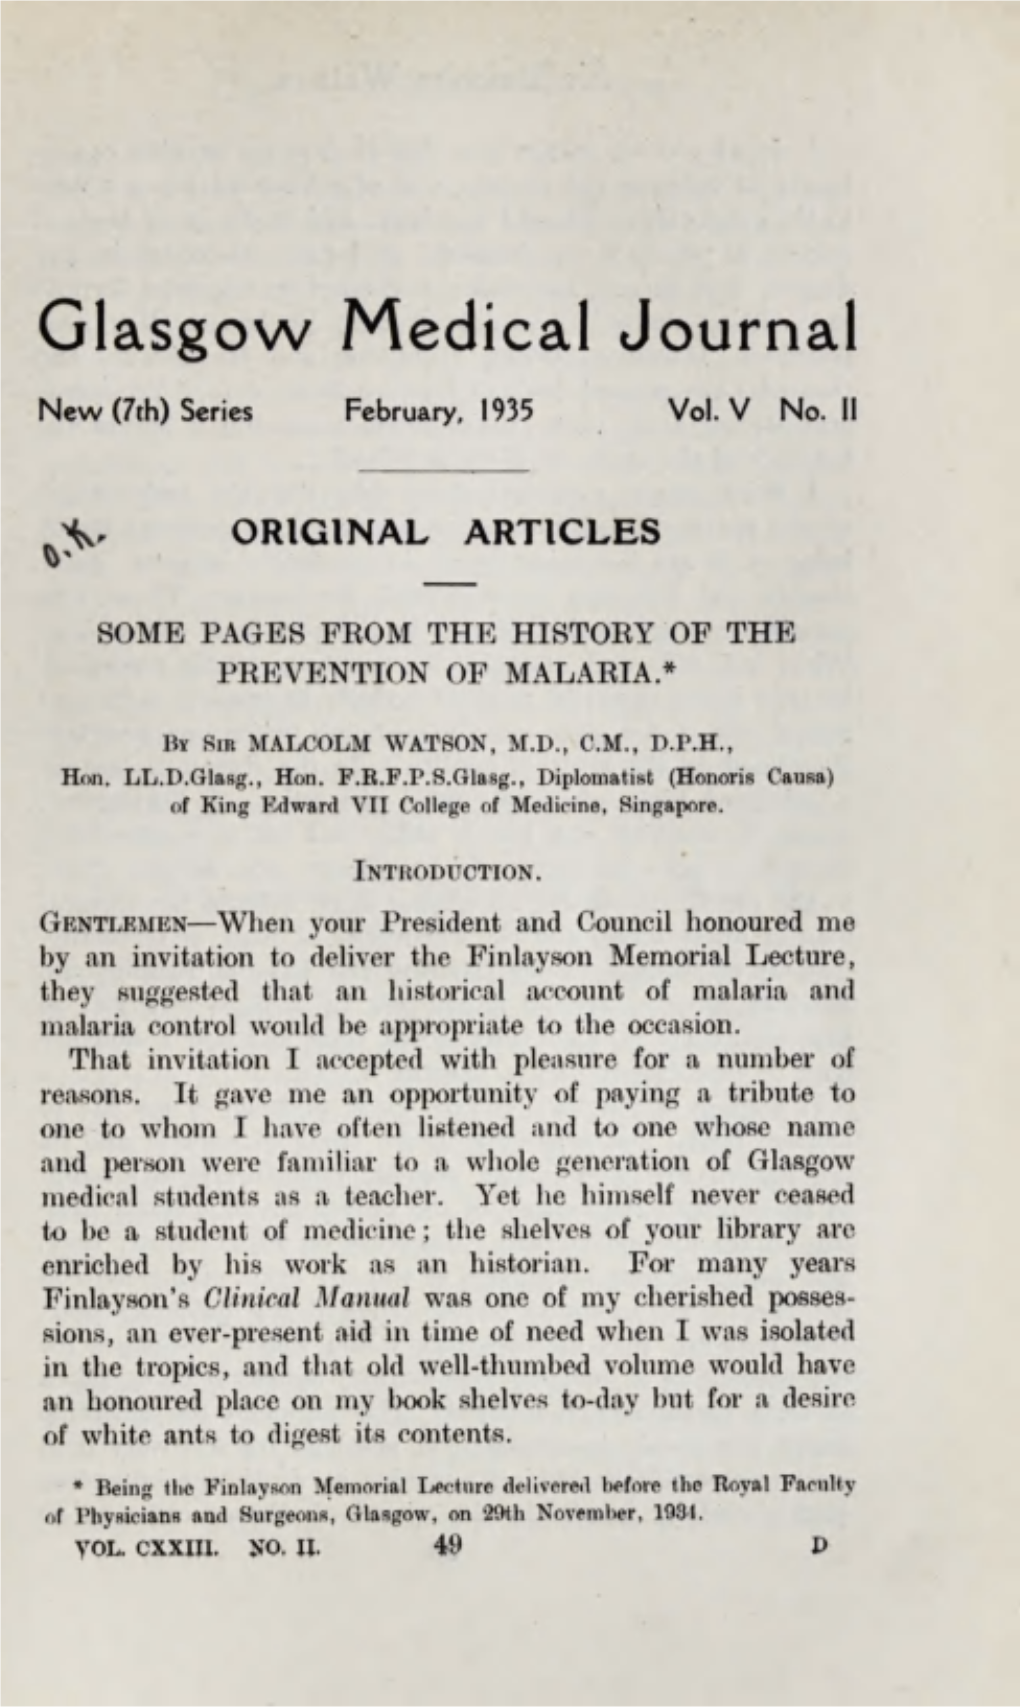 Some Pages from the History of the Prevention of Malaria."